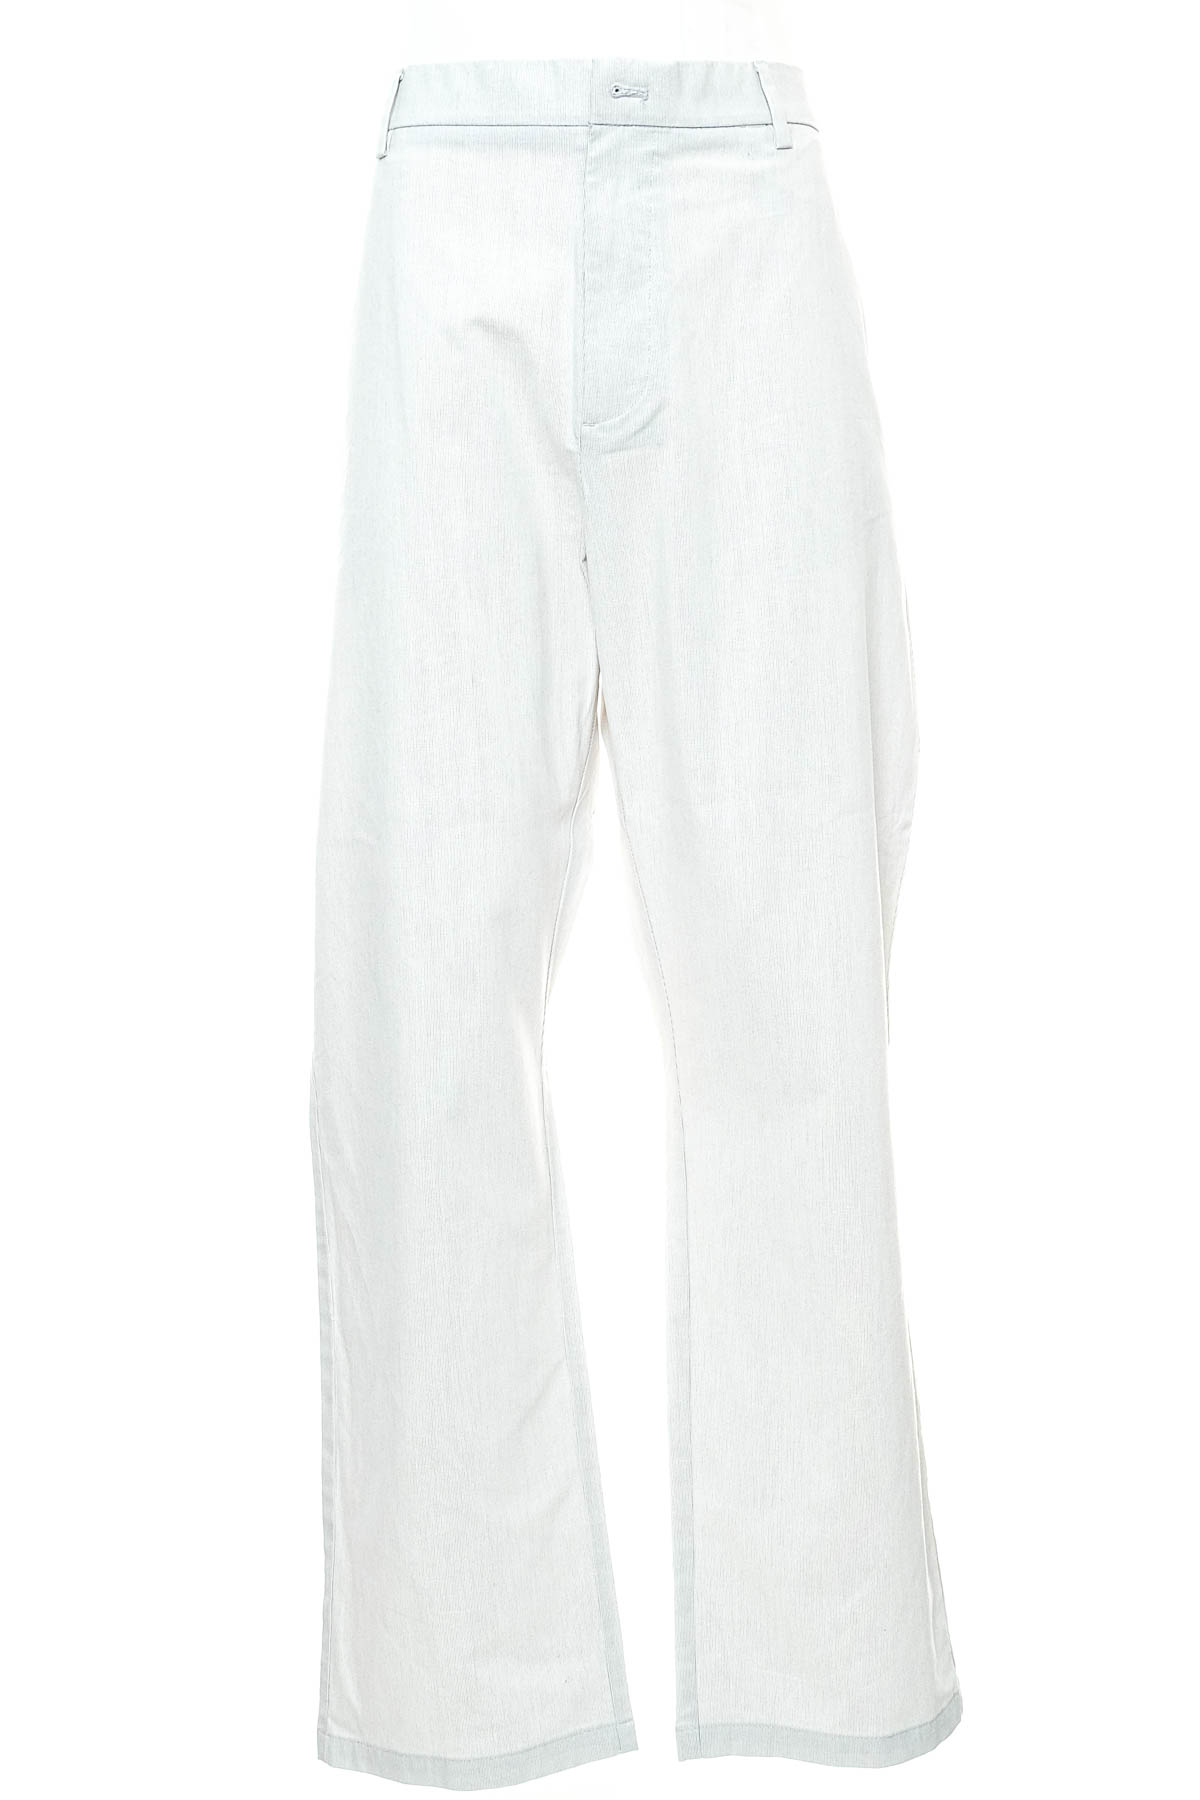 Men's trousers - OLD NAVY - 0